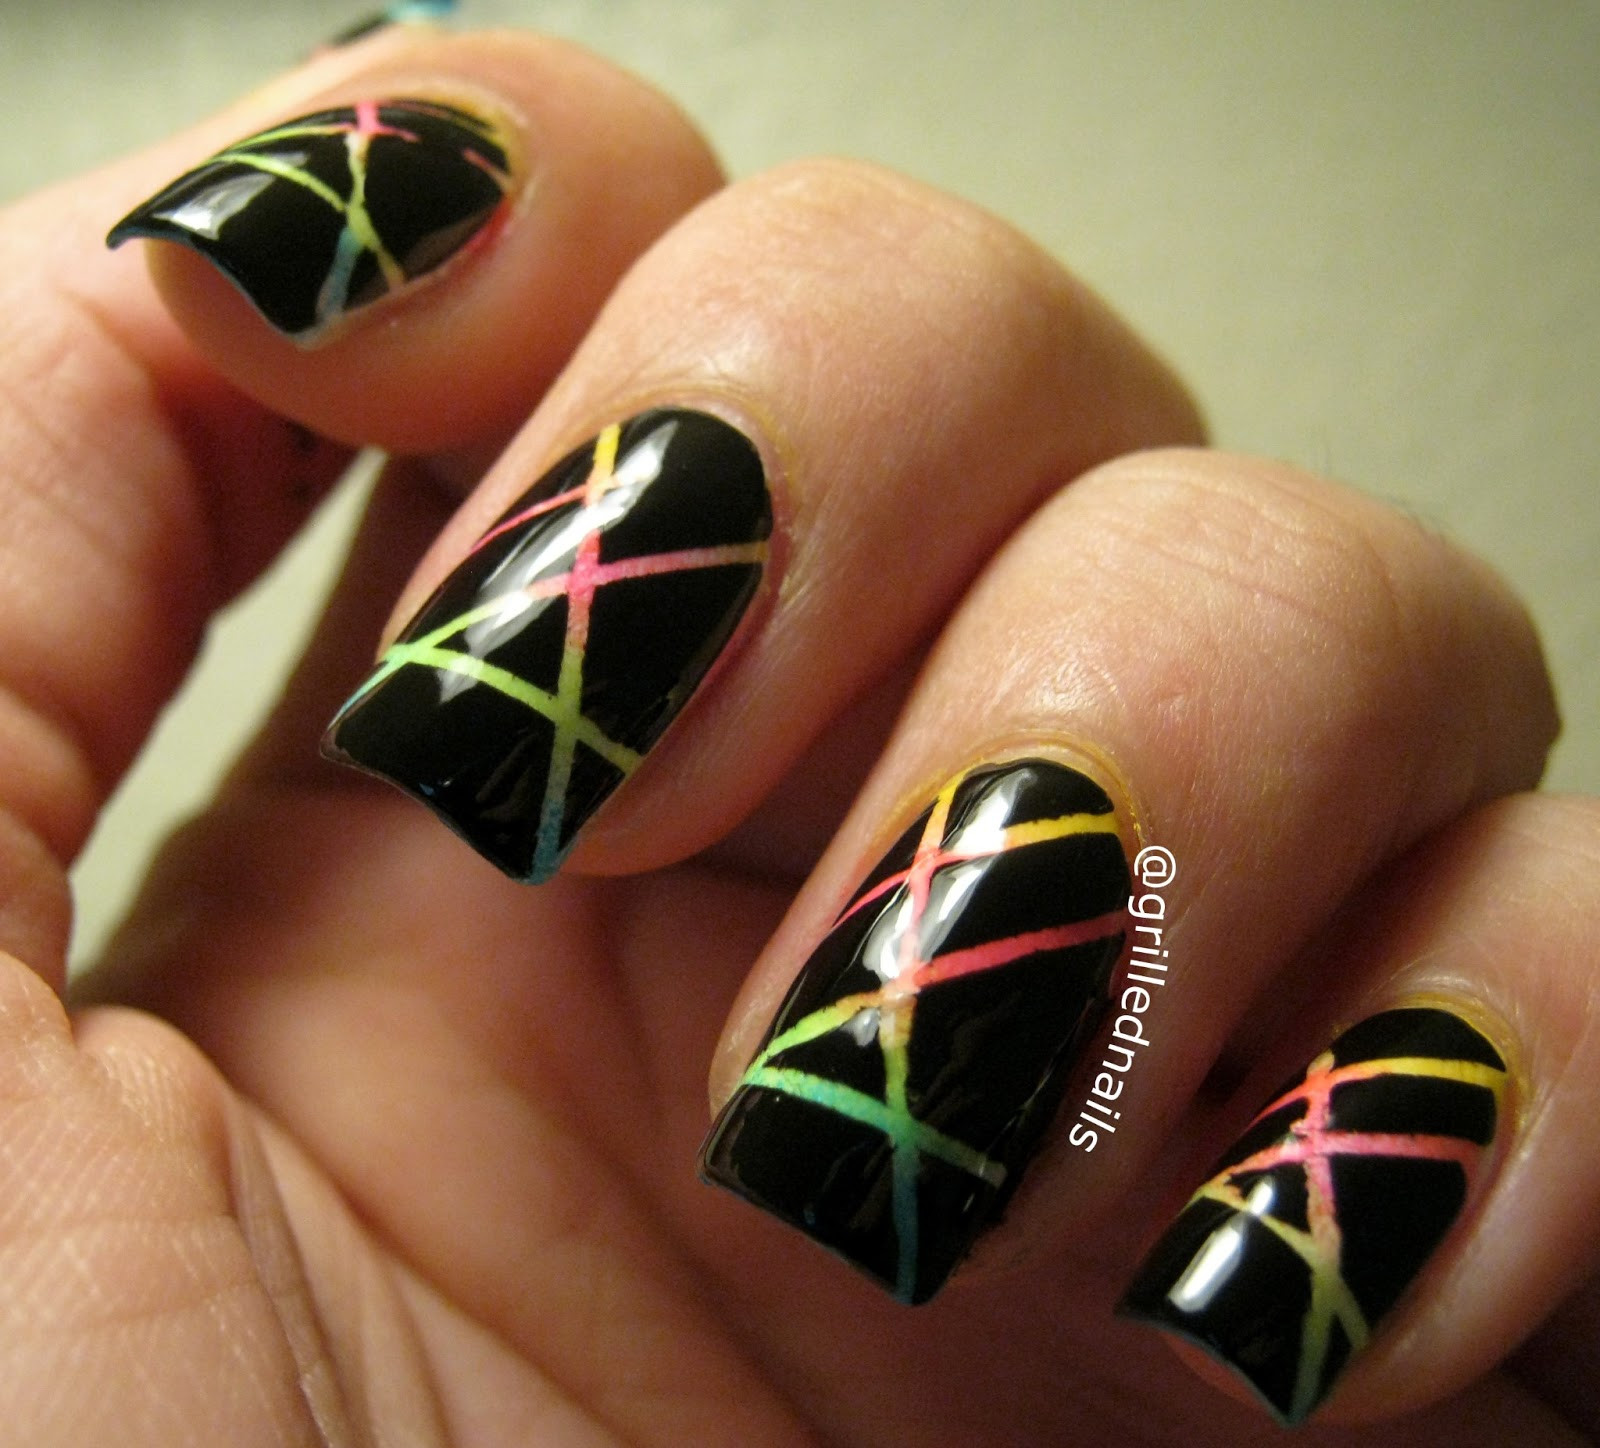 Nail Ideas With Tape
 Nail Art Designs With Tape